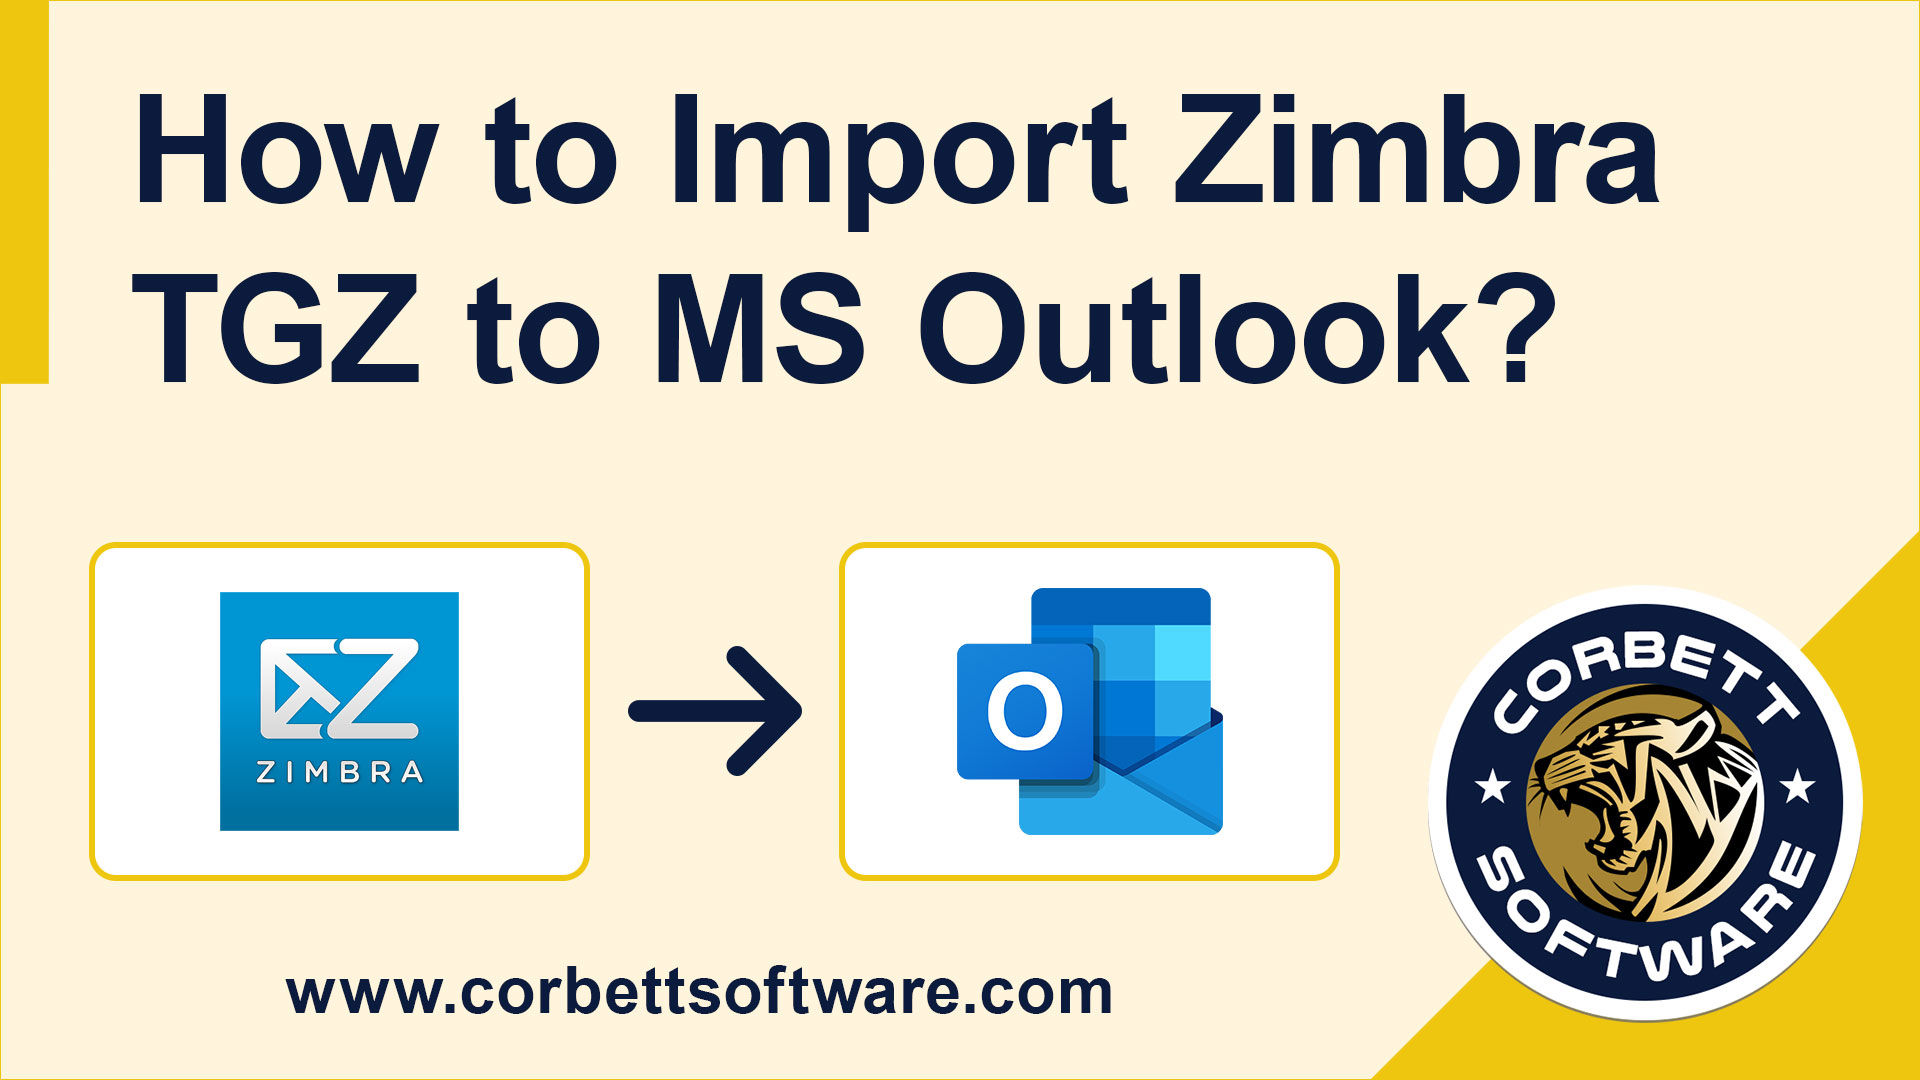 Zimbra to MS Outlook